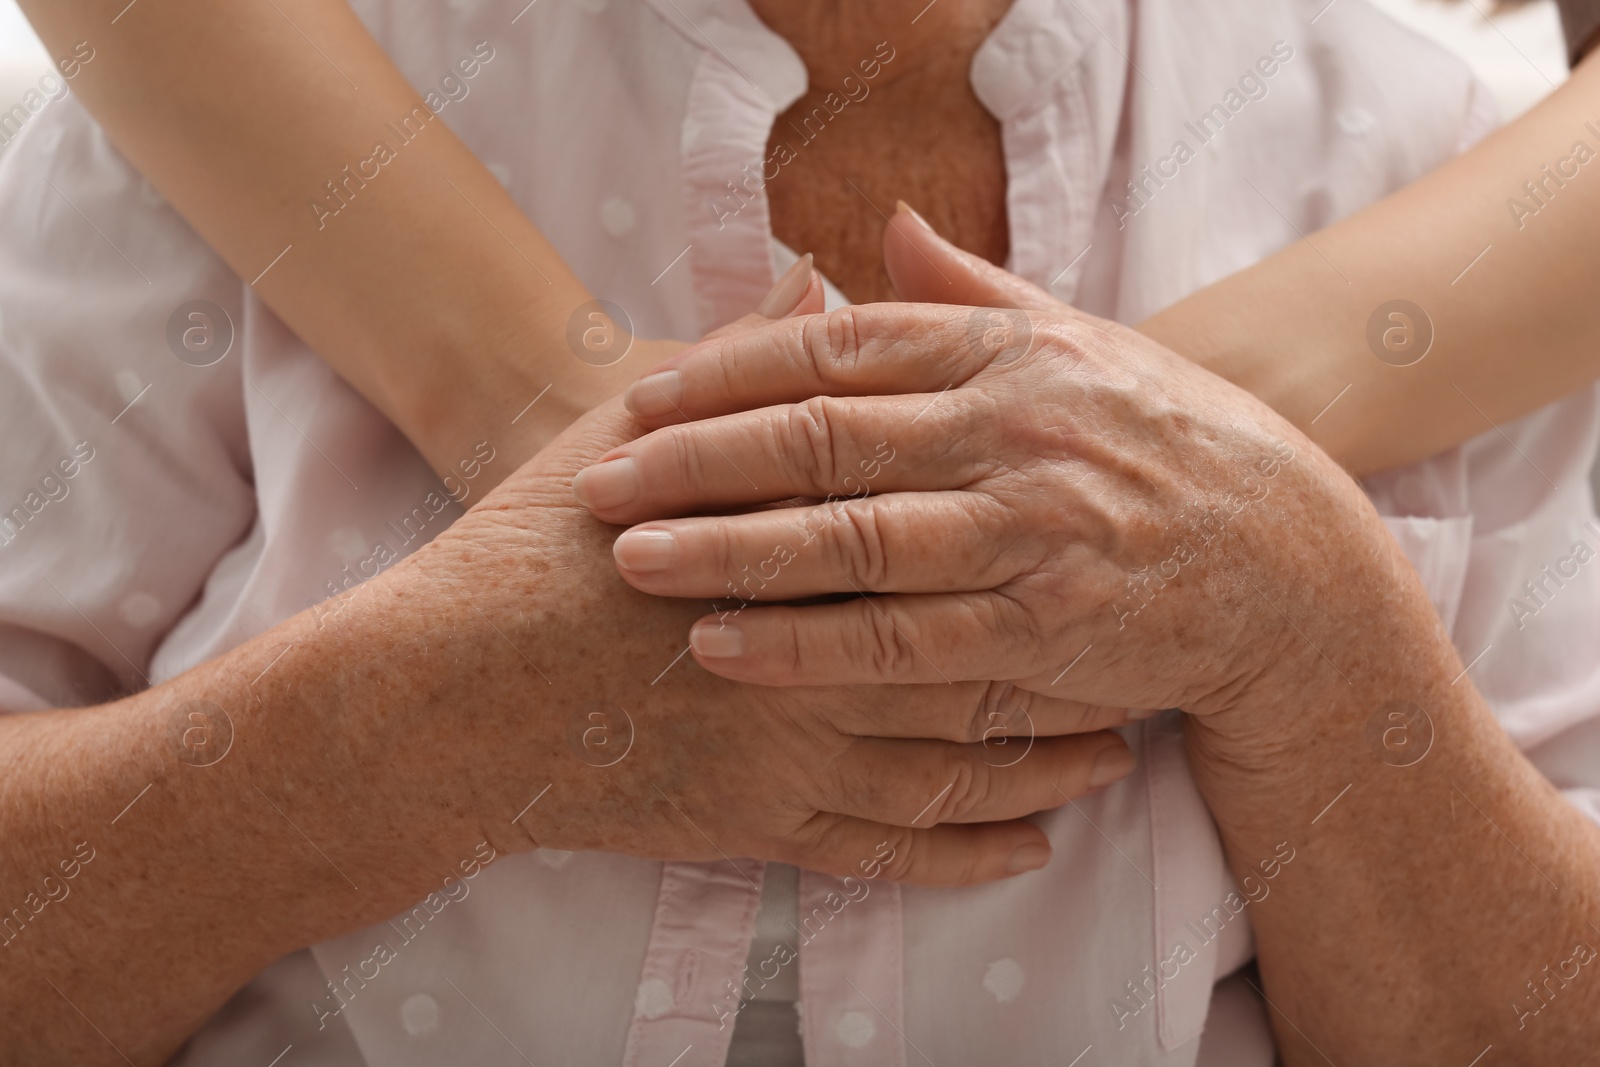 Photo of Young and elderly women hugging, closeup view